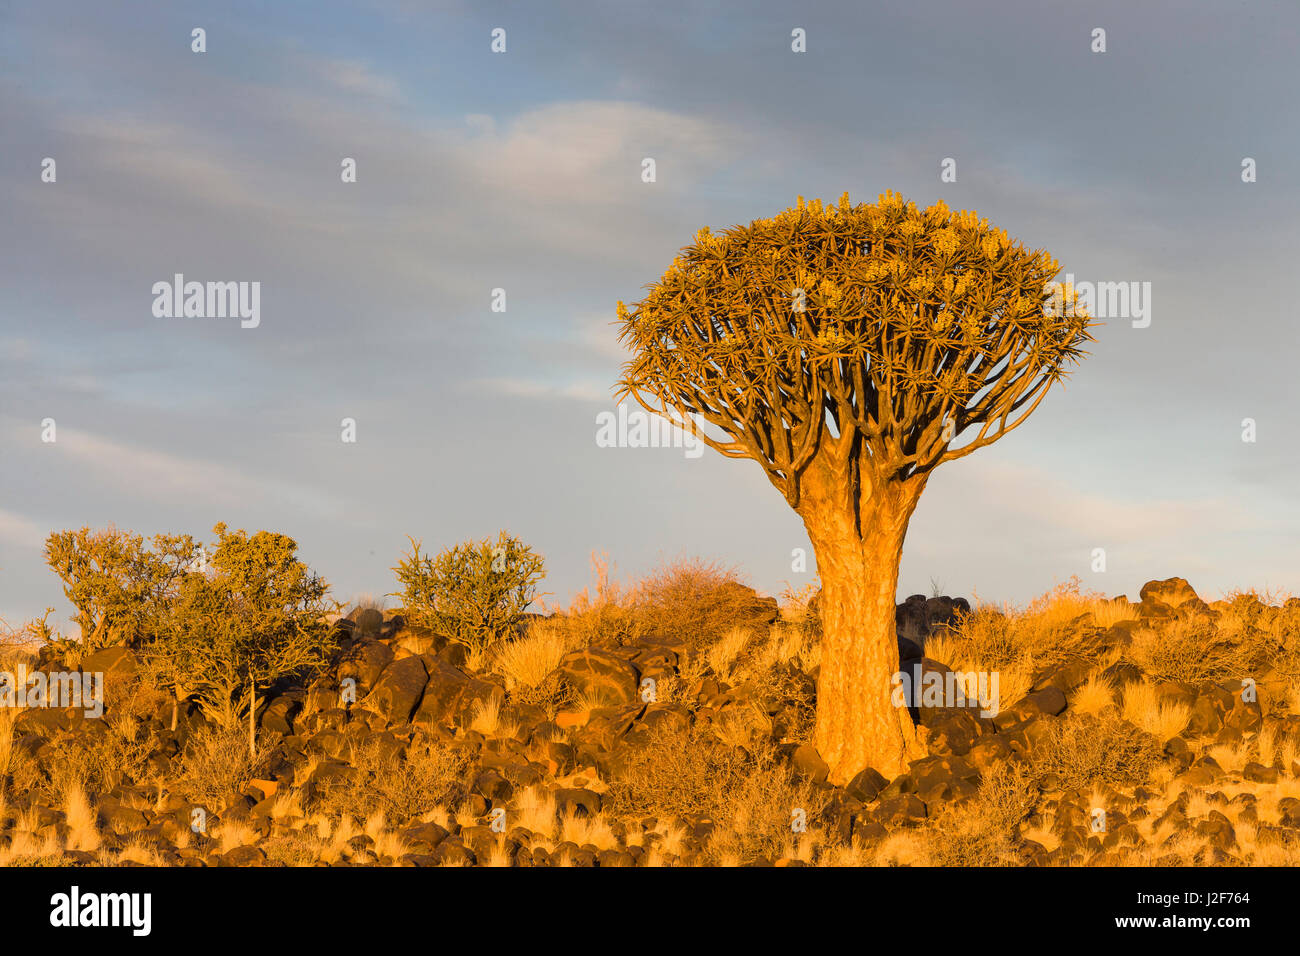 Quiver tree at sunset Stock Photo